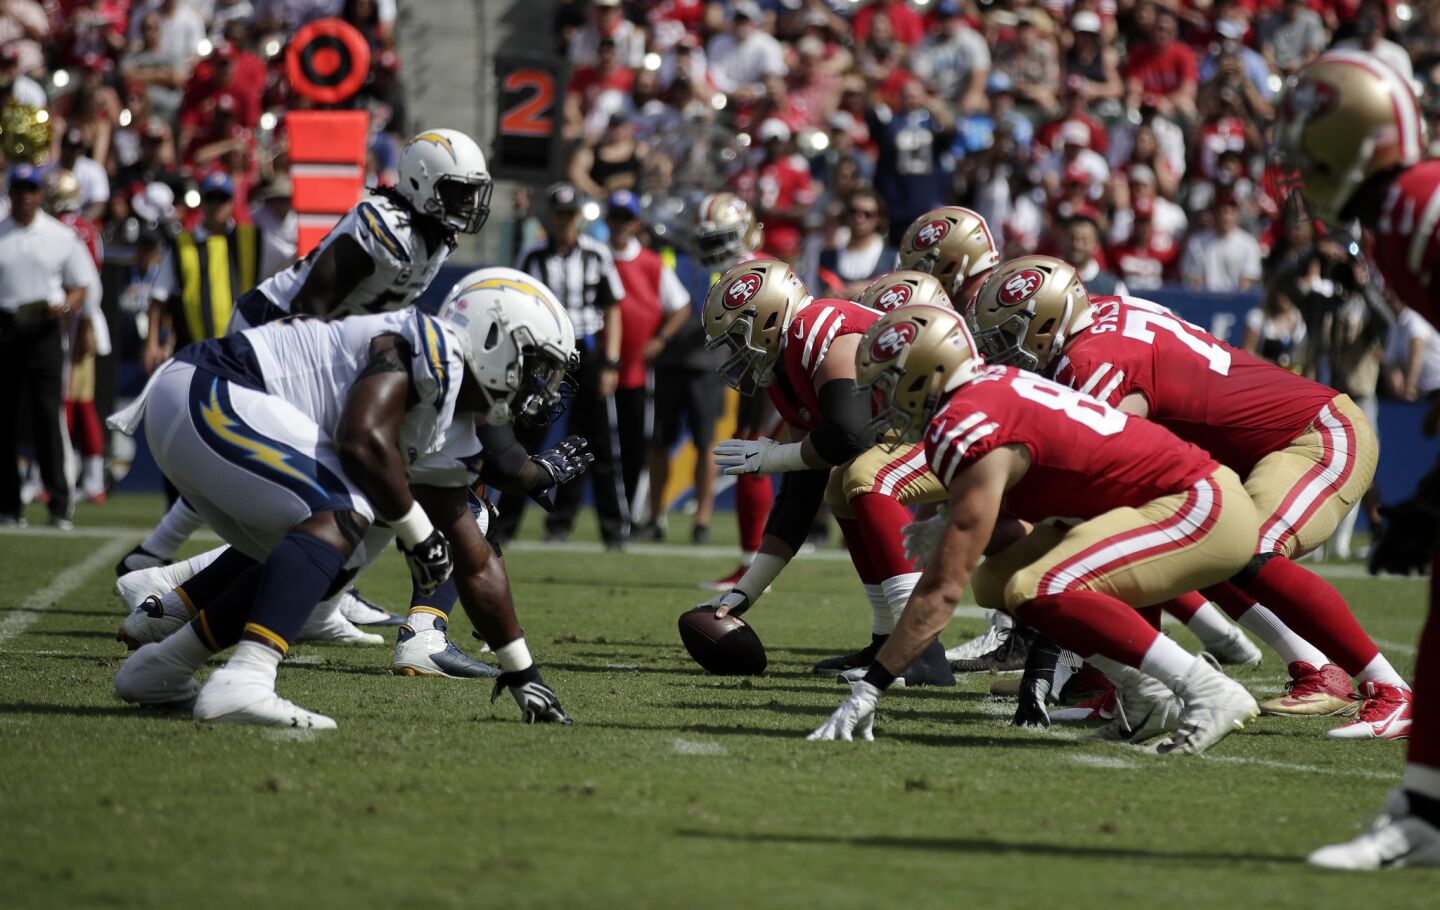 Los Angeles Chargers, left, and San Francisco 49ers get set during the first half of an NFL football game, Sunday, Sept. 30, 2018, in Carson, Calif.